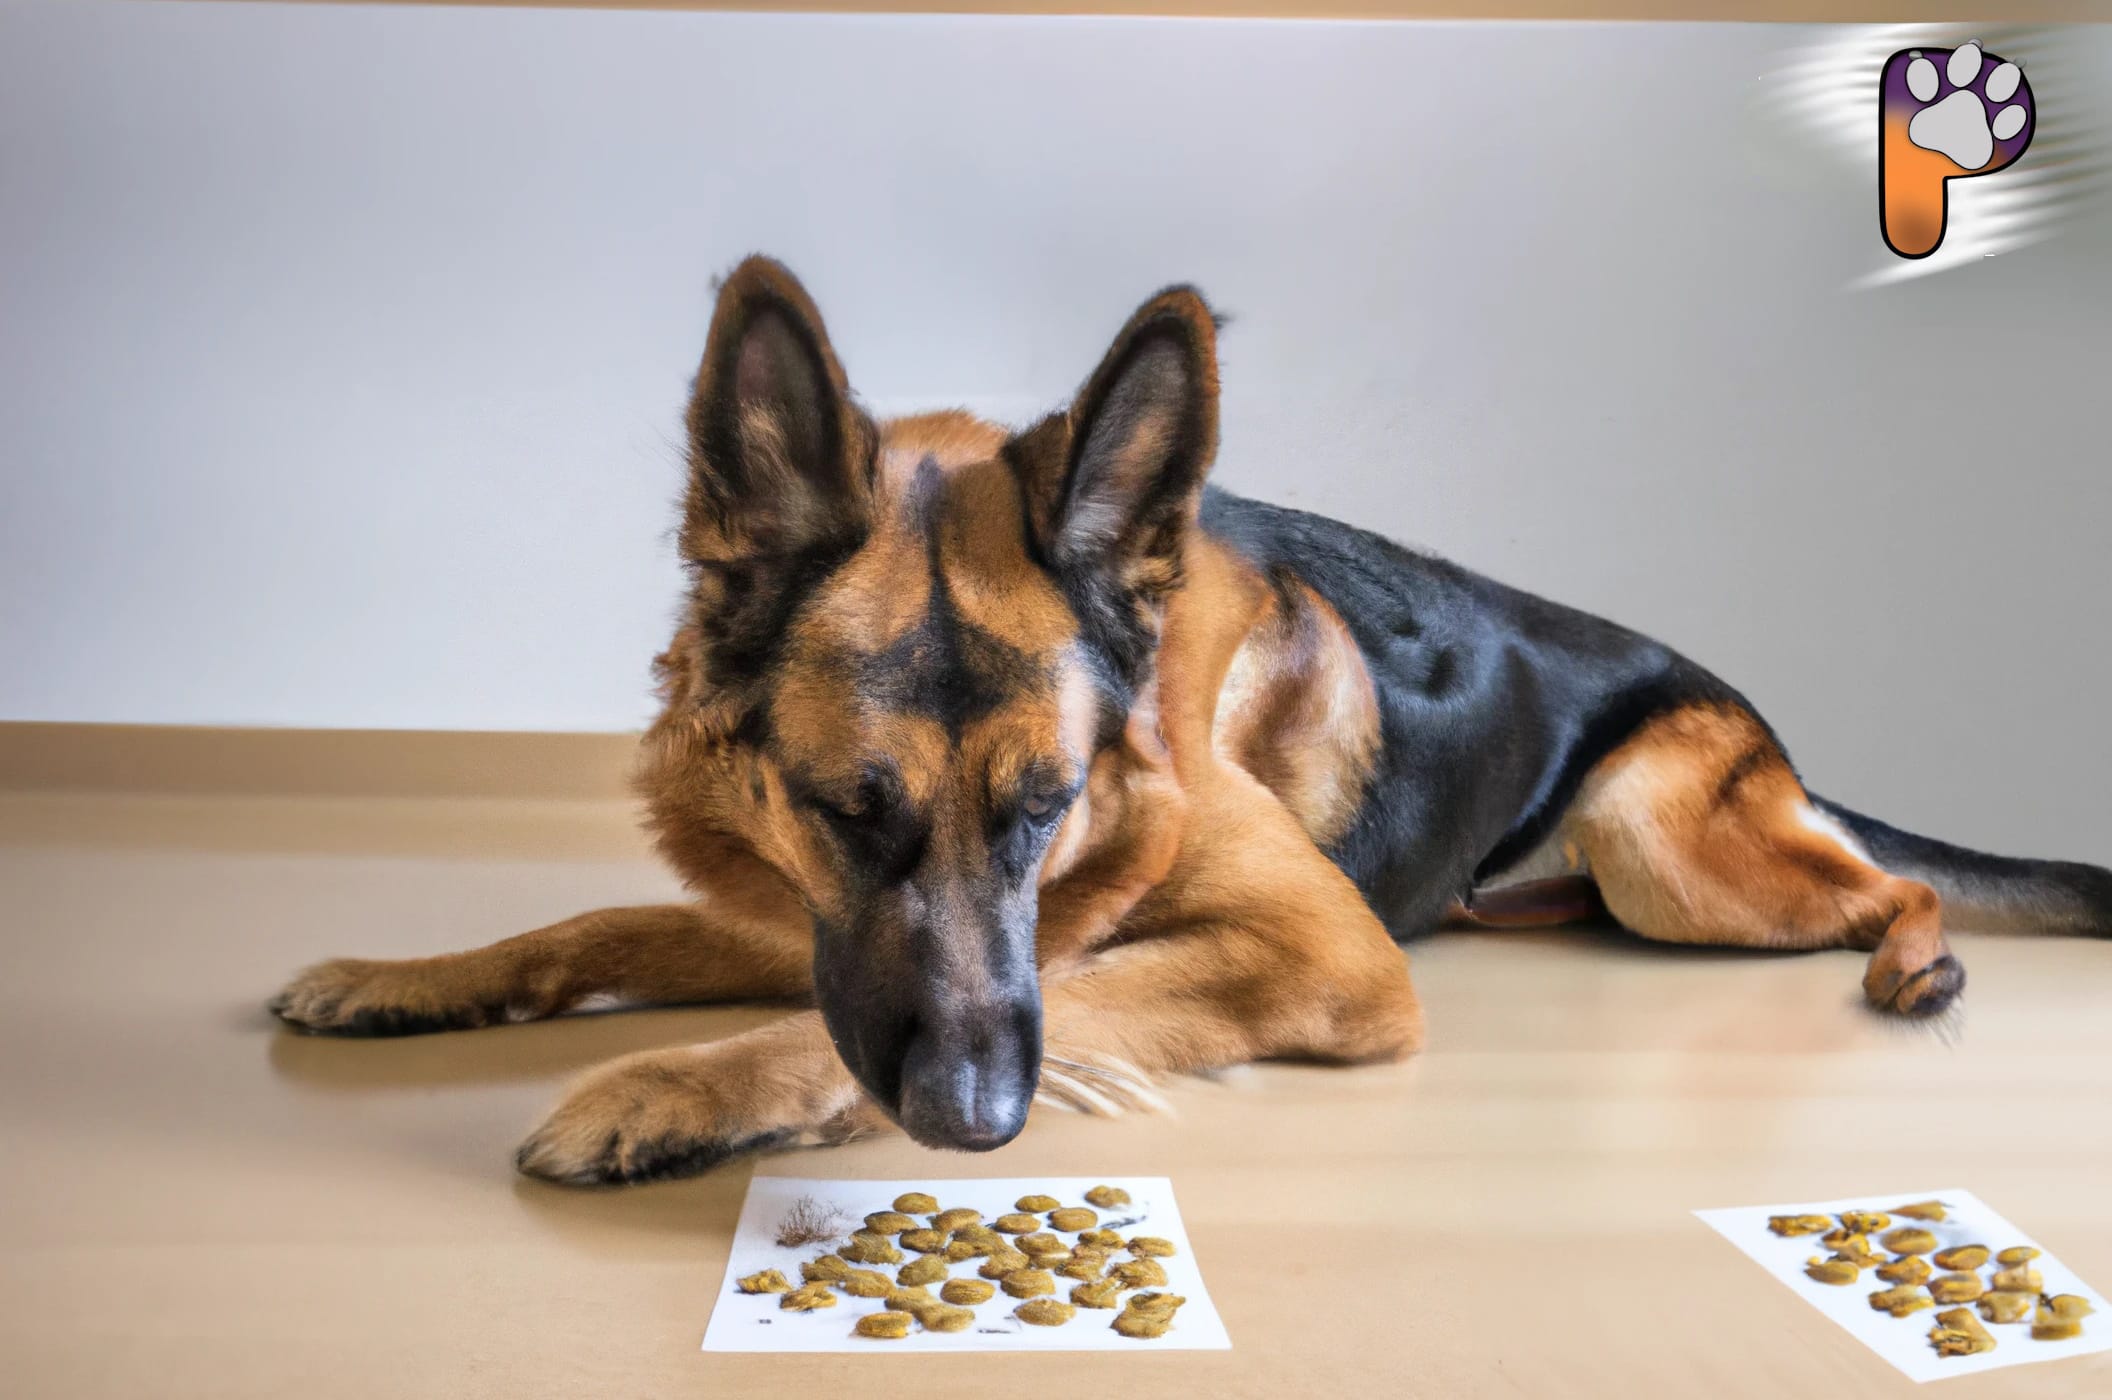 German Shepherd Diet: What You Need to Know